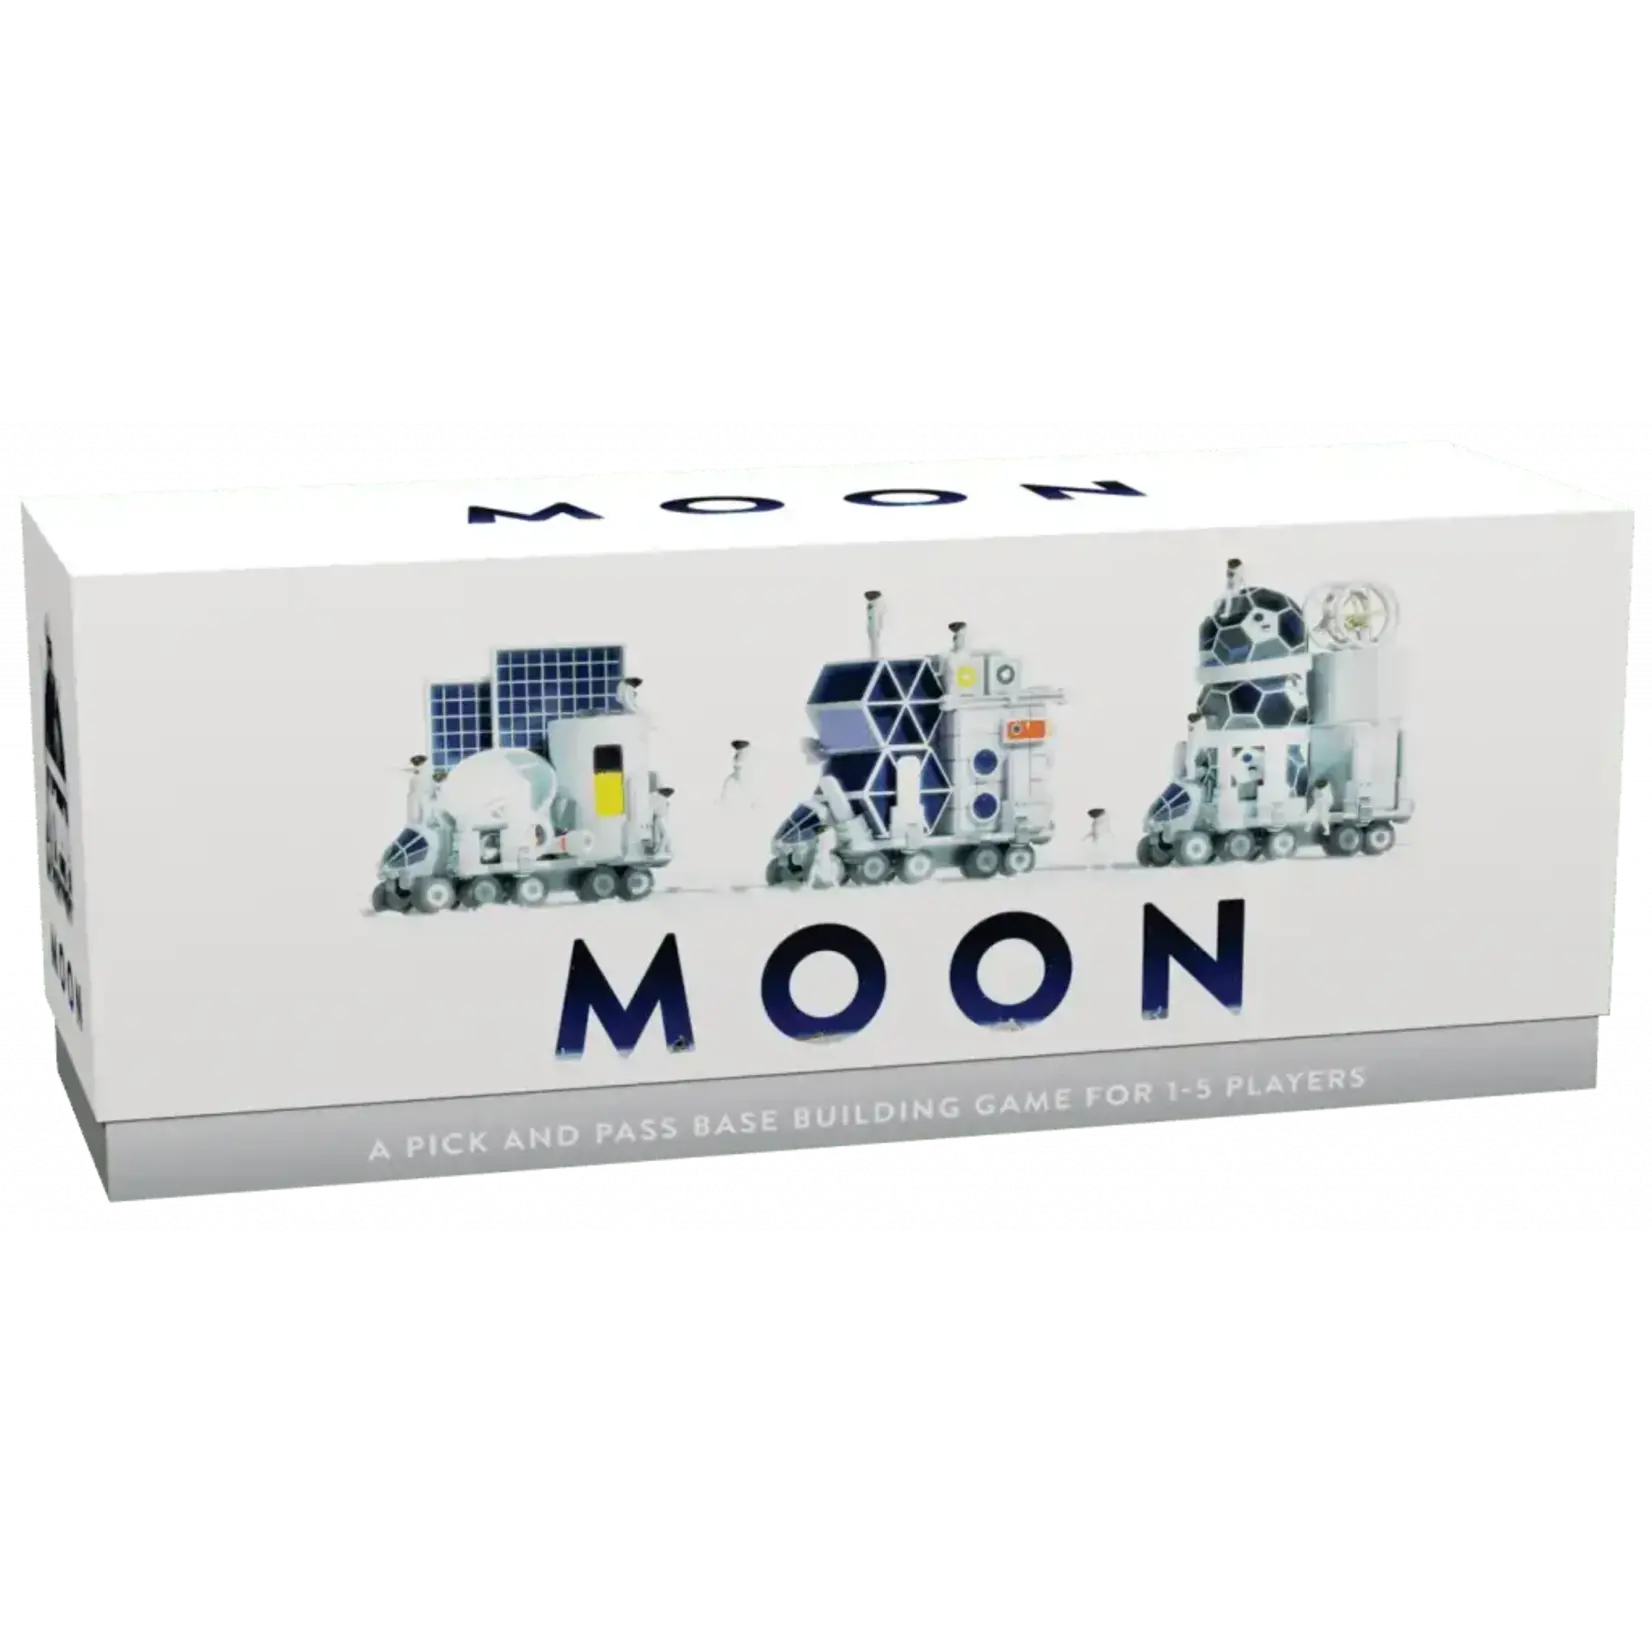 Sinister Fish Games Moon Deluxe Edition & Expansion